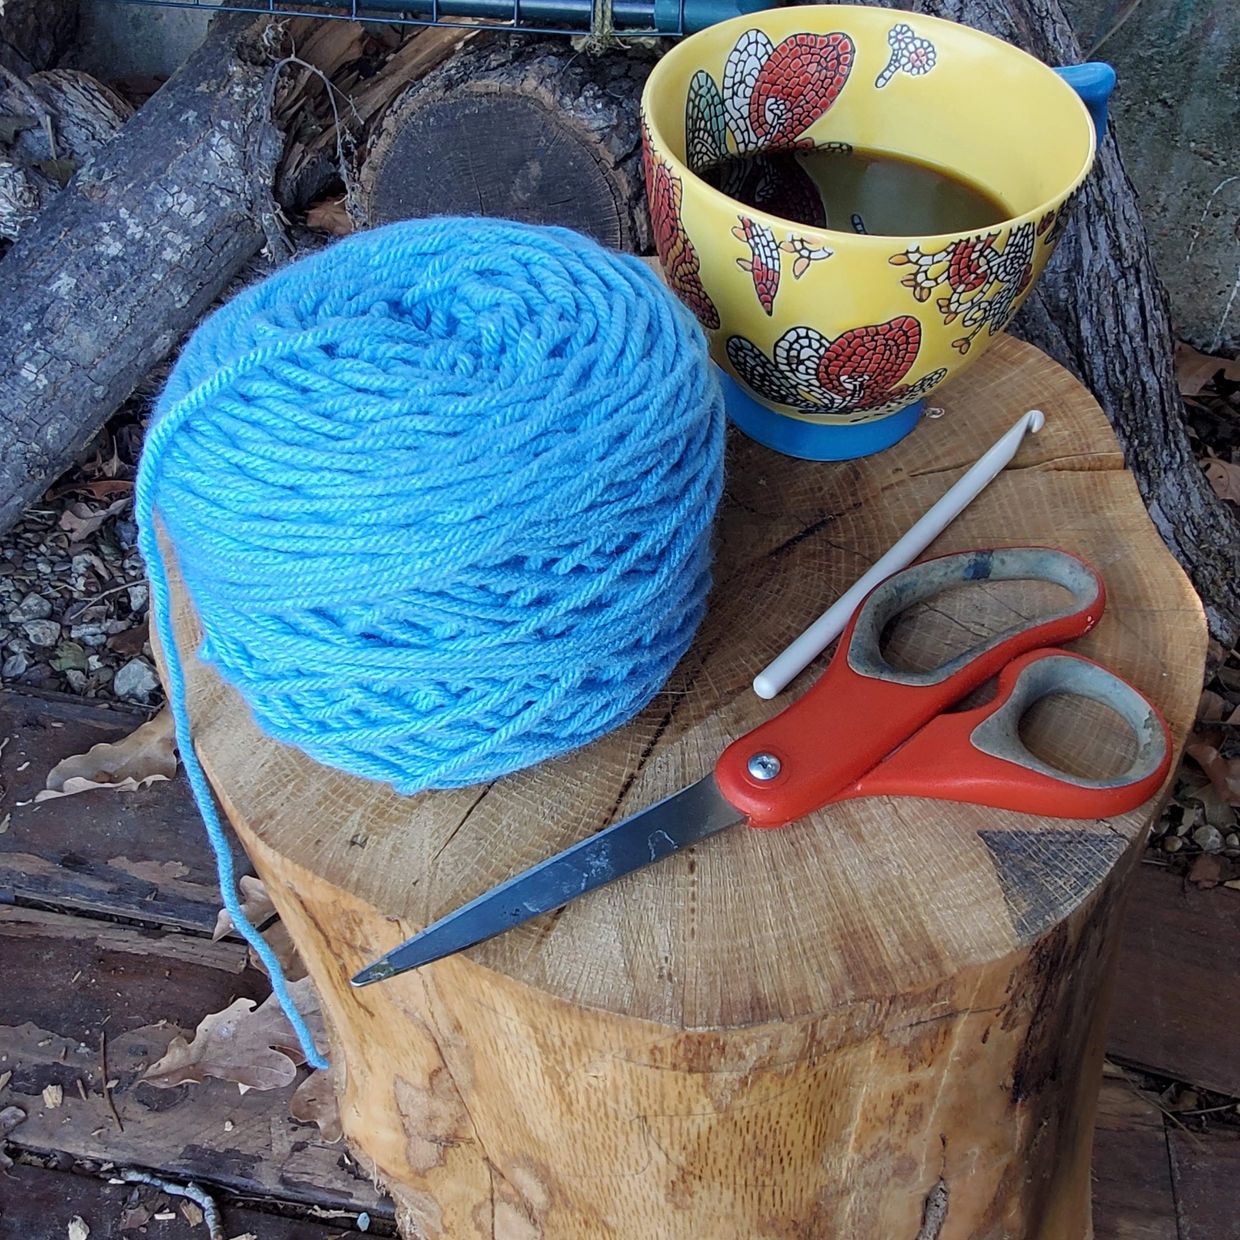 A cake of bright blue yarn, a pair of red scissors, a crochet hook, and a cup of coffee on a stump